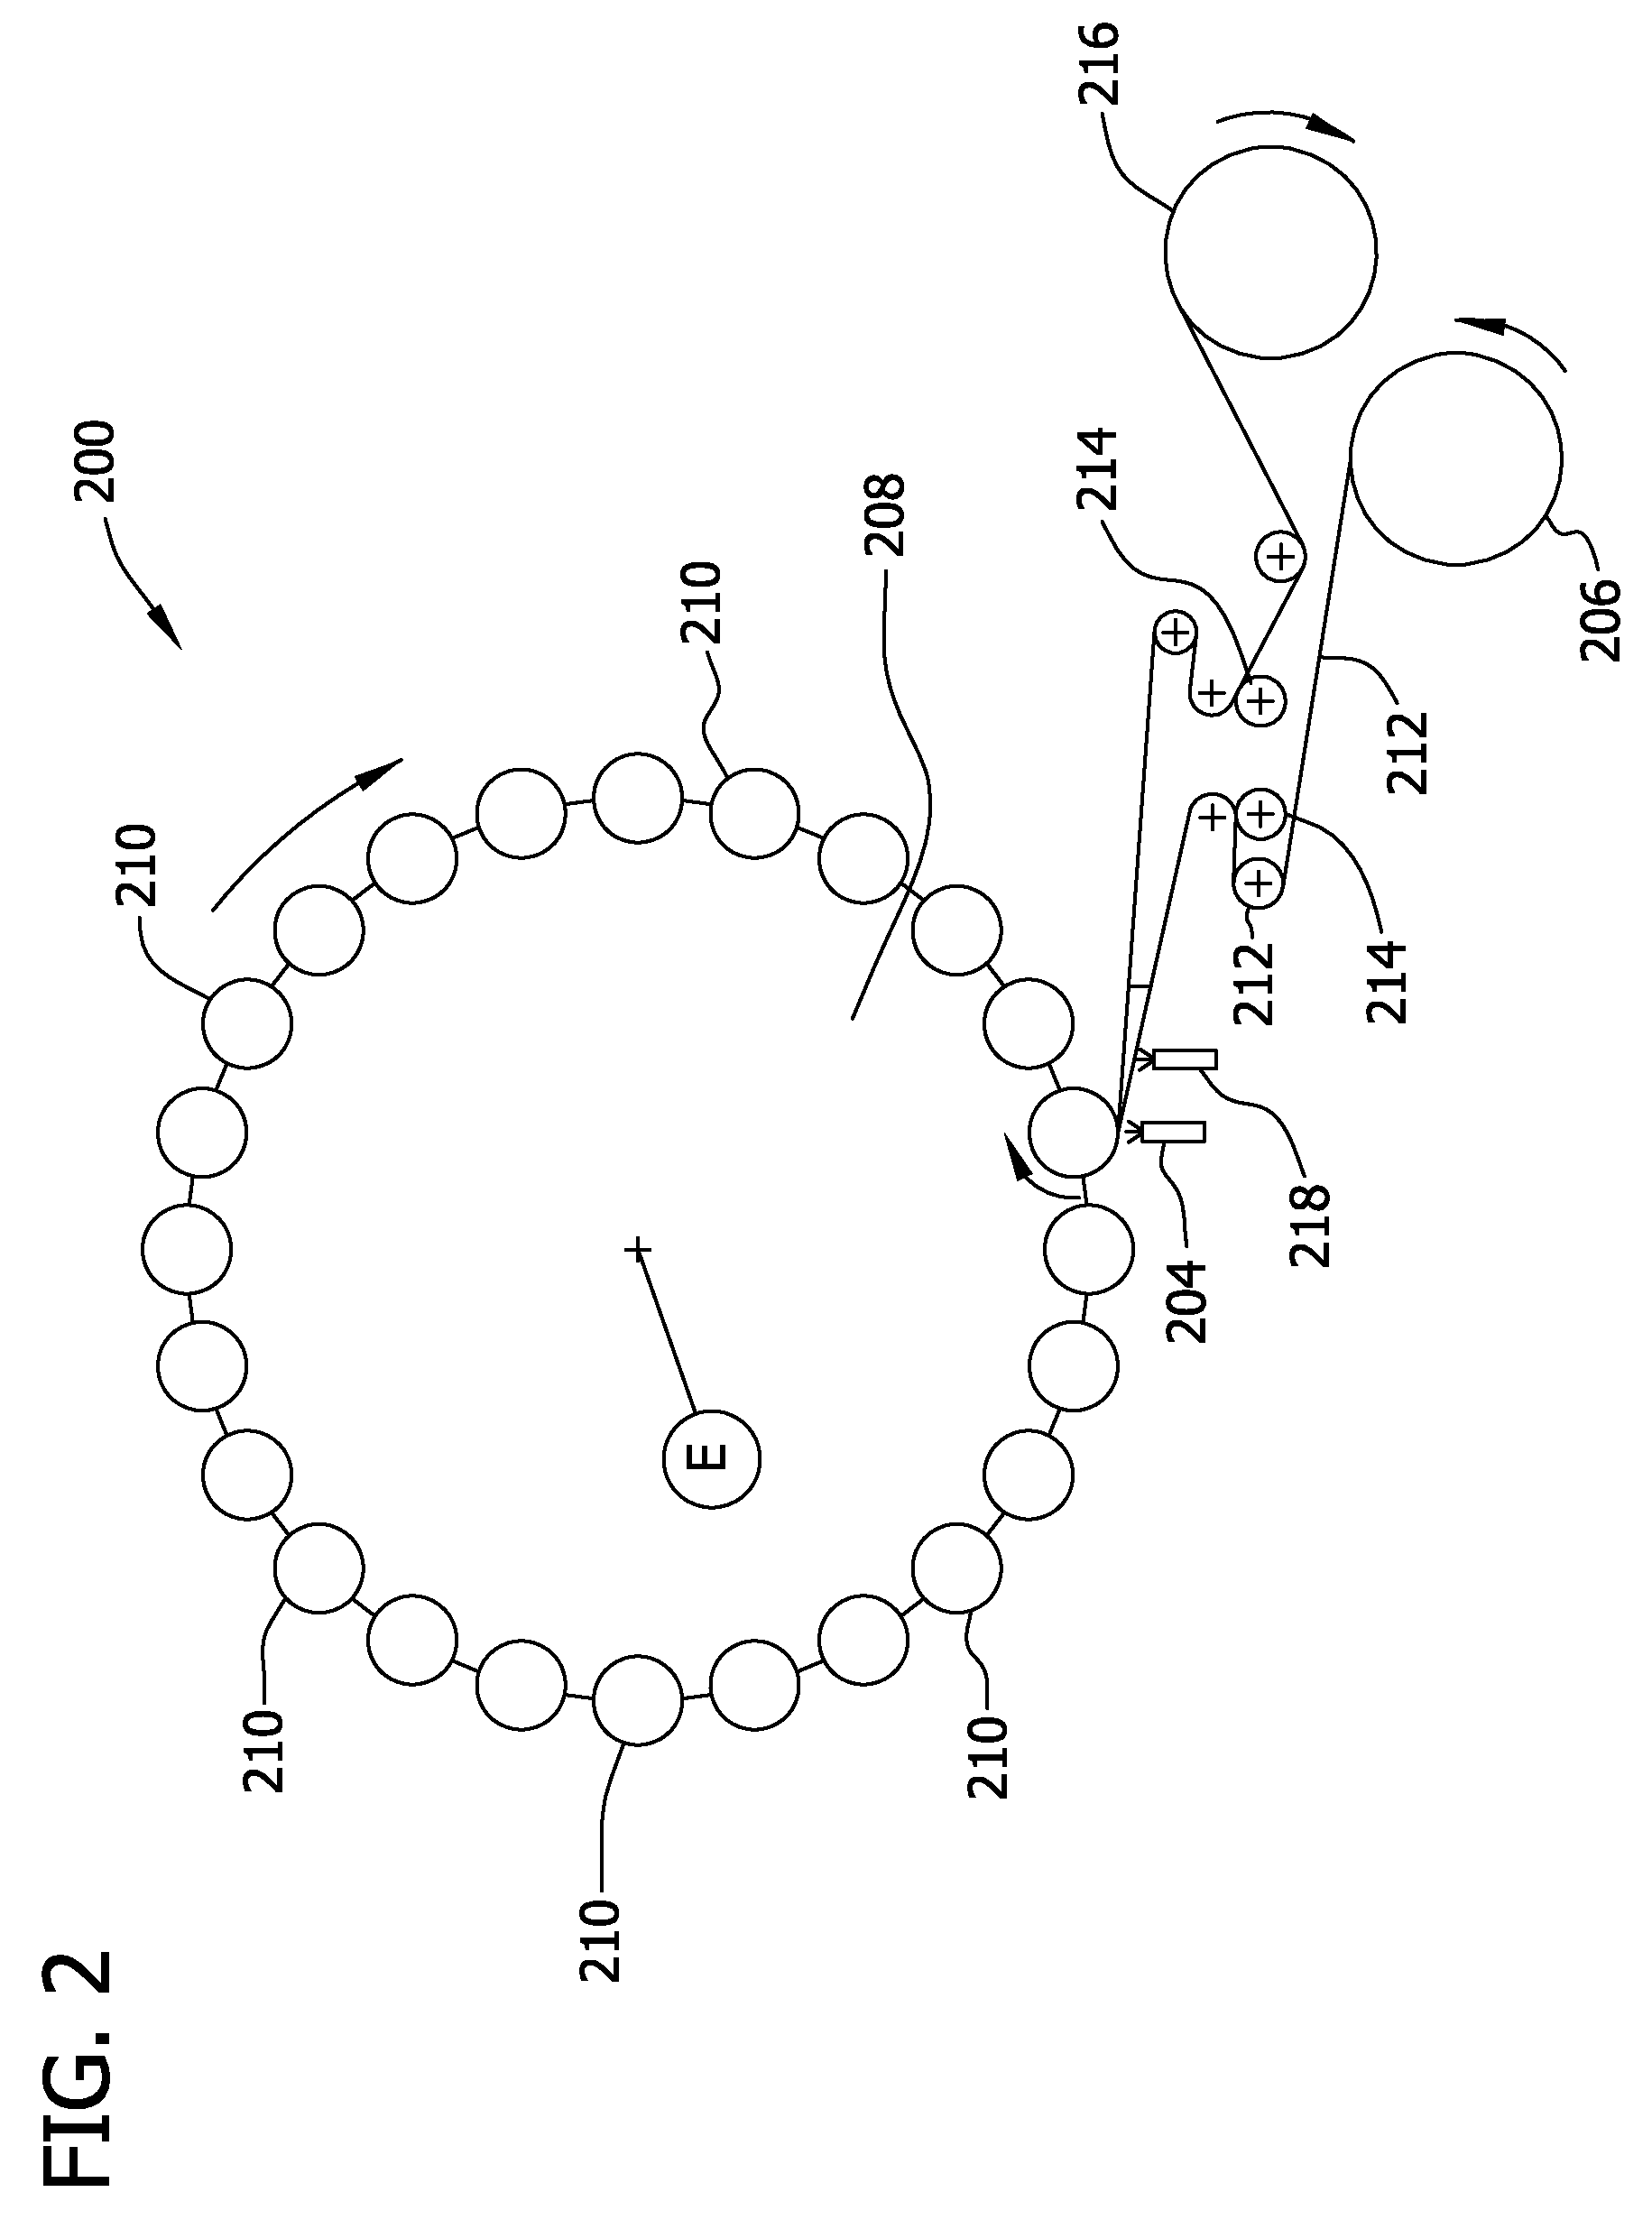 System and method for path planning